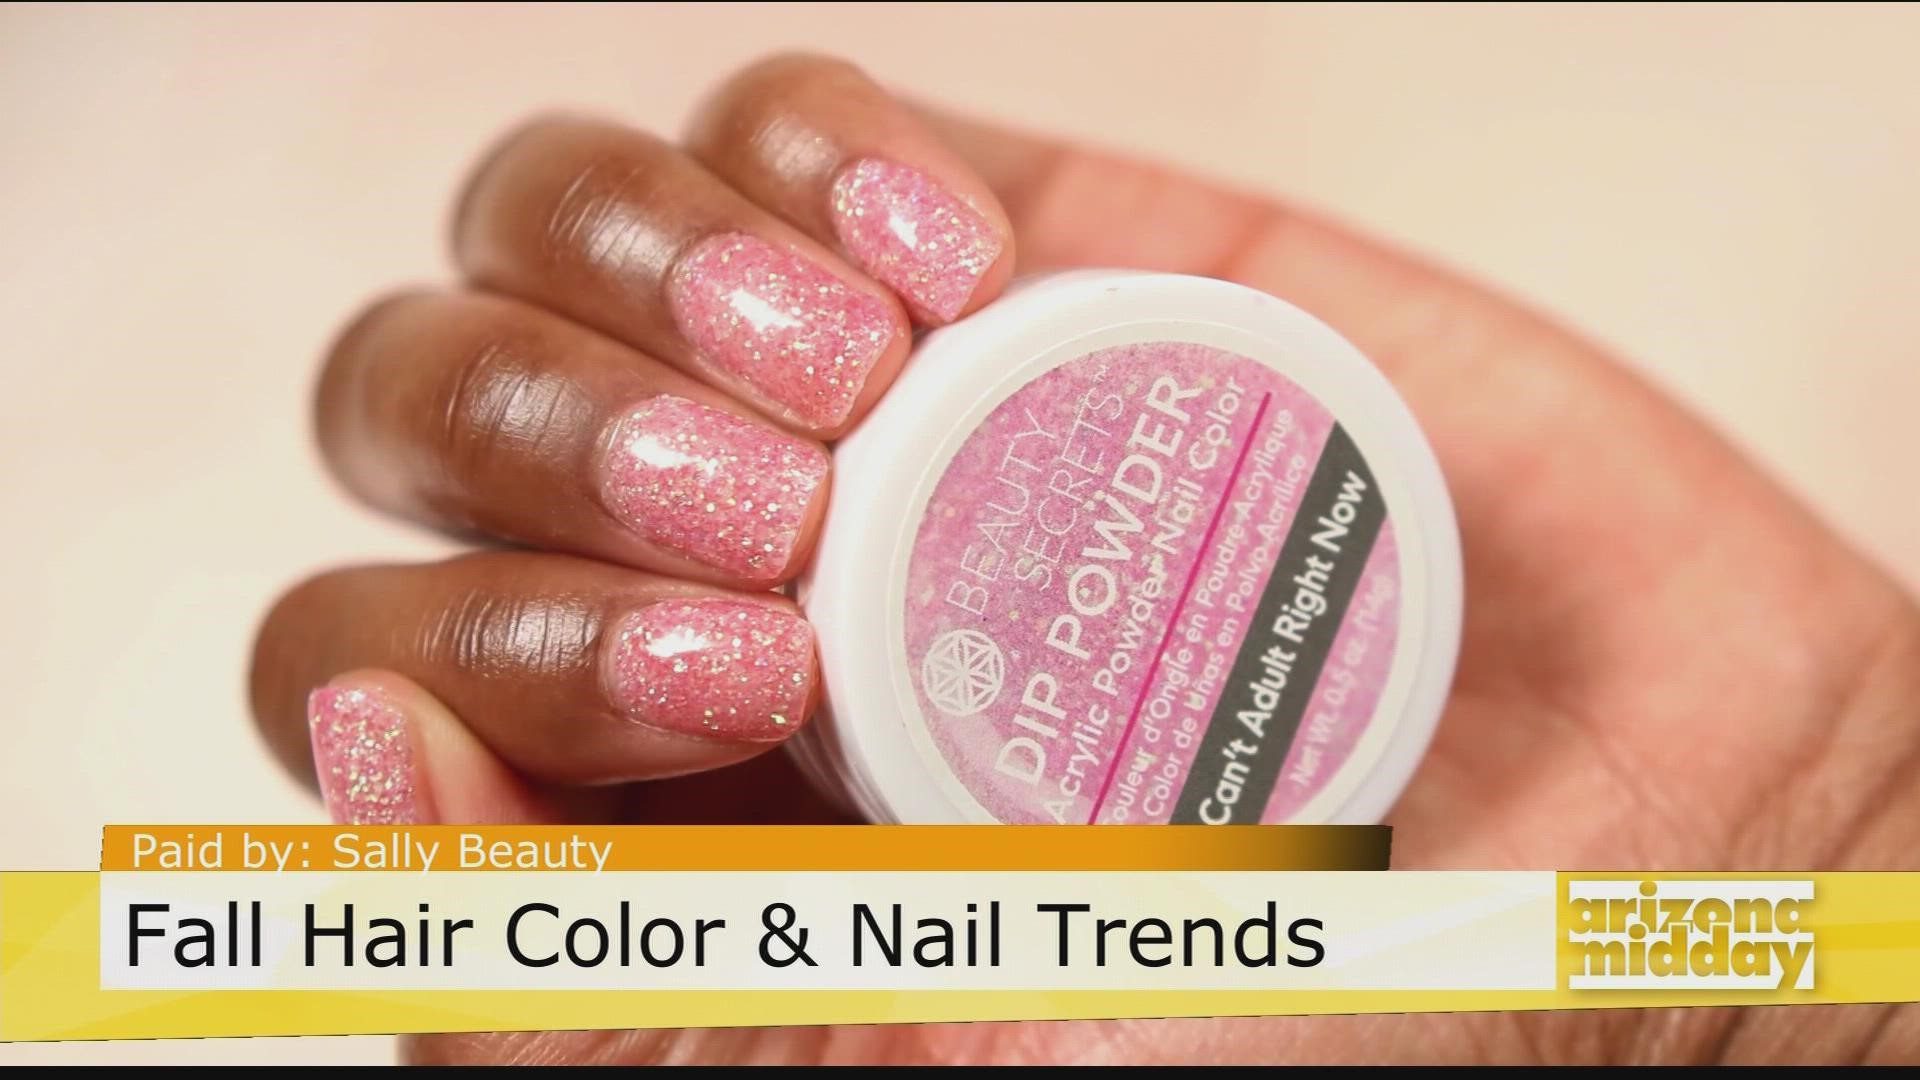 Gregory Patterson, Celeb Stylist & Asea Mae, Sally Beauty Crew Member, shows us the top fall trends for beauty and how to DIY with help from Sally Beauty